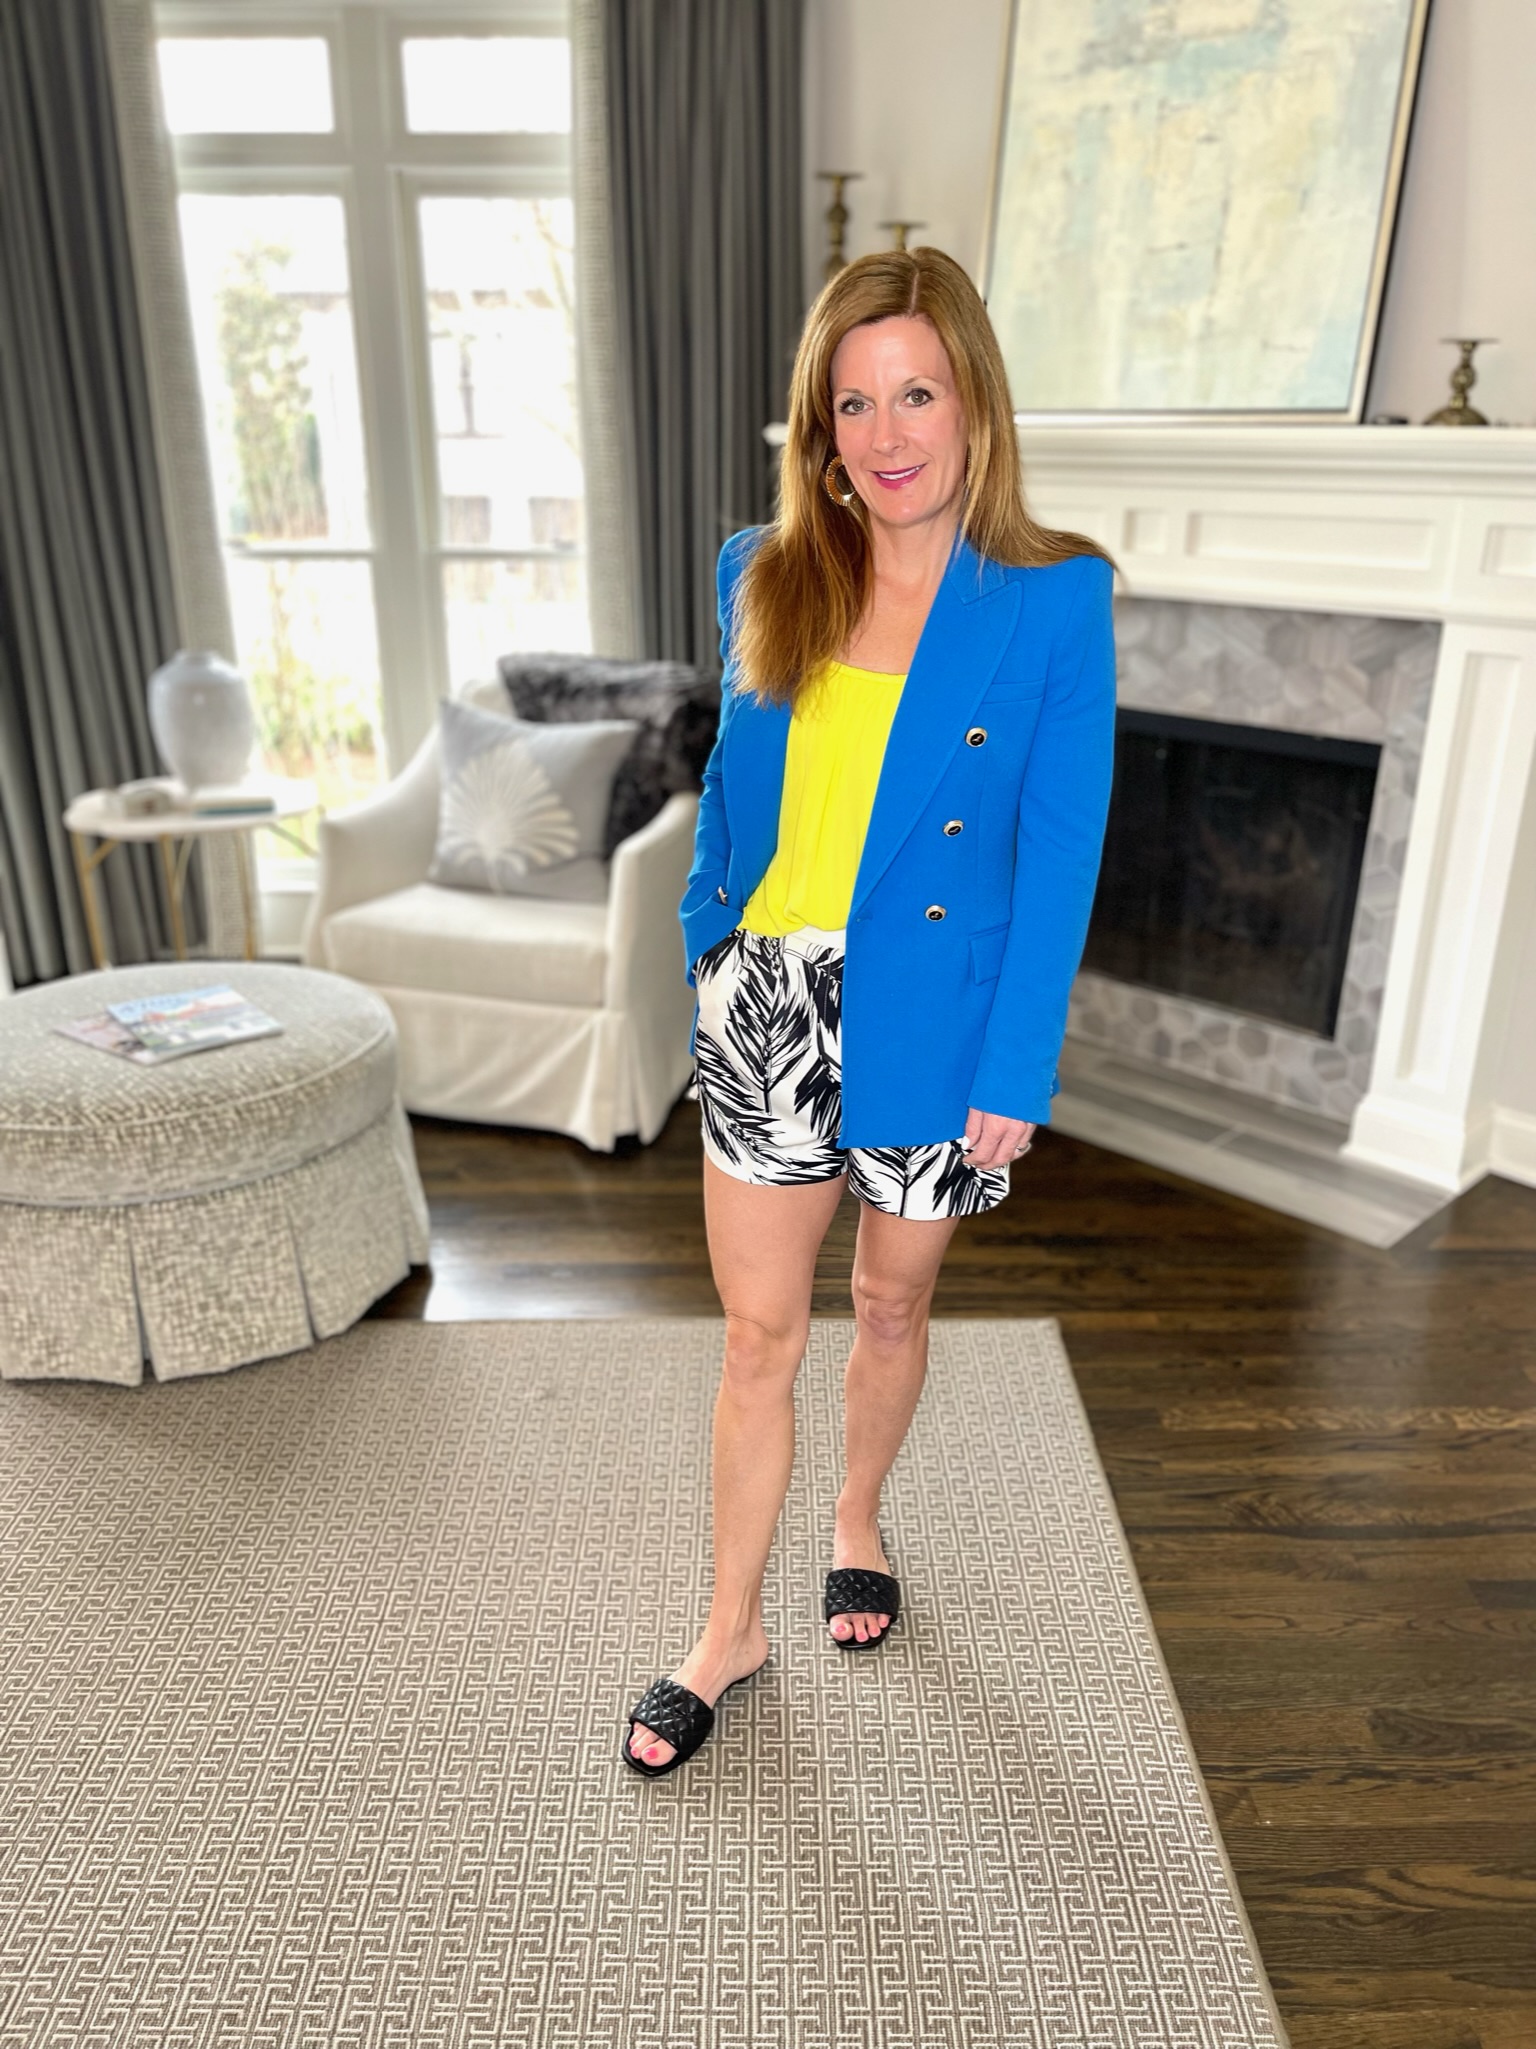 styling a blazer with shorts blazer and shorts look how to colorblock a spring outfit fun patterned shorts for summer patterned shorts for spring